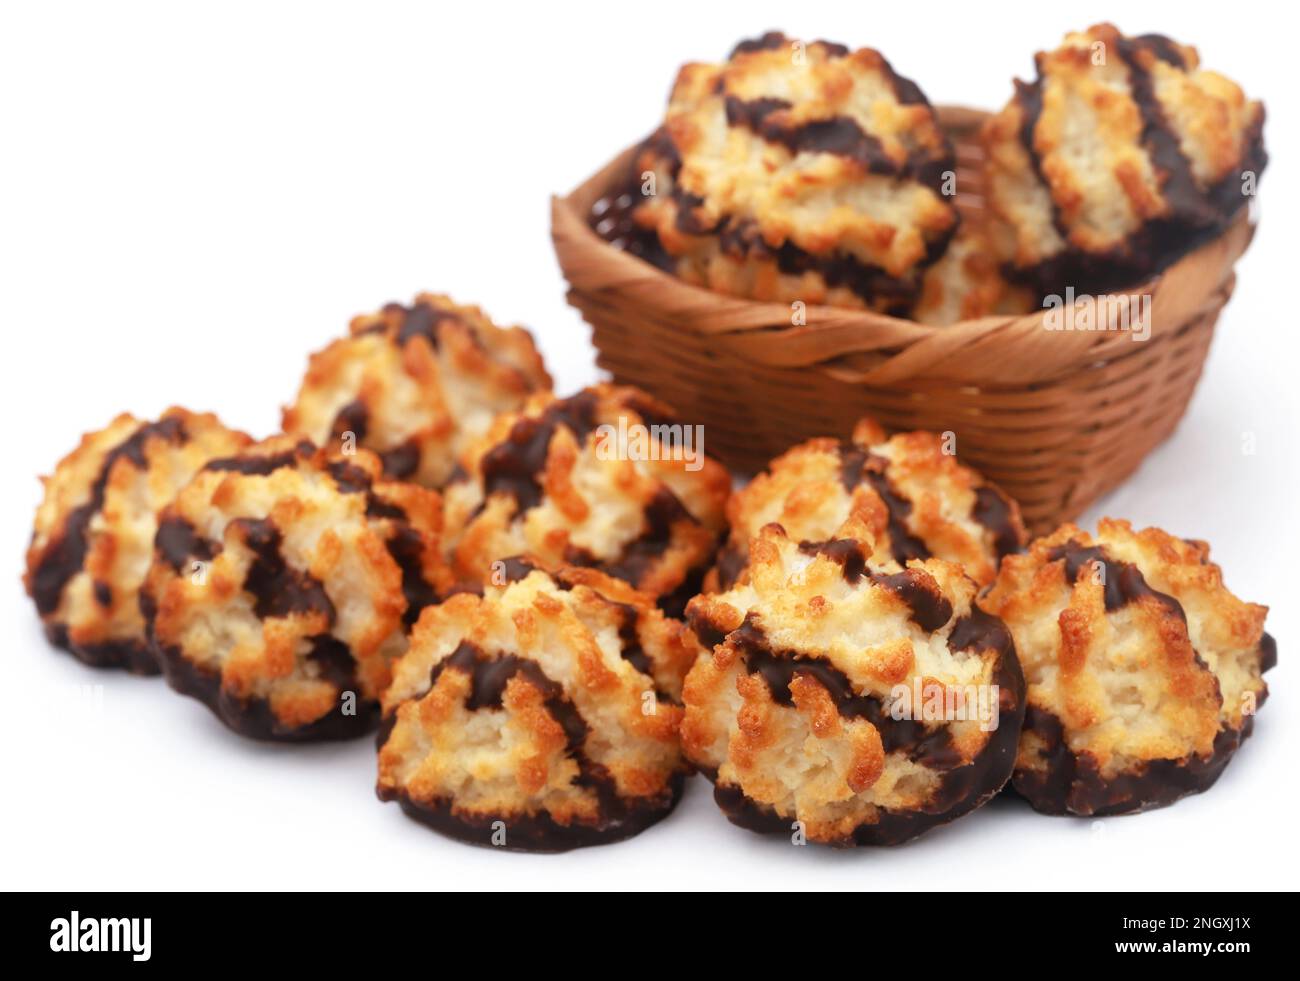 Tasty coconut chocolate cookies over white background Stock Photo